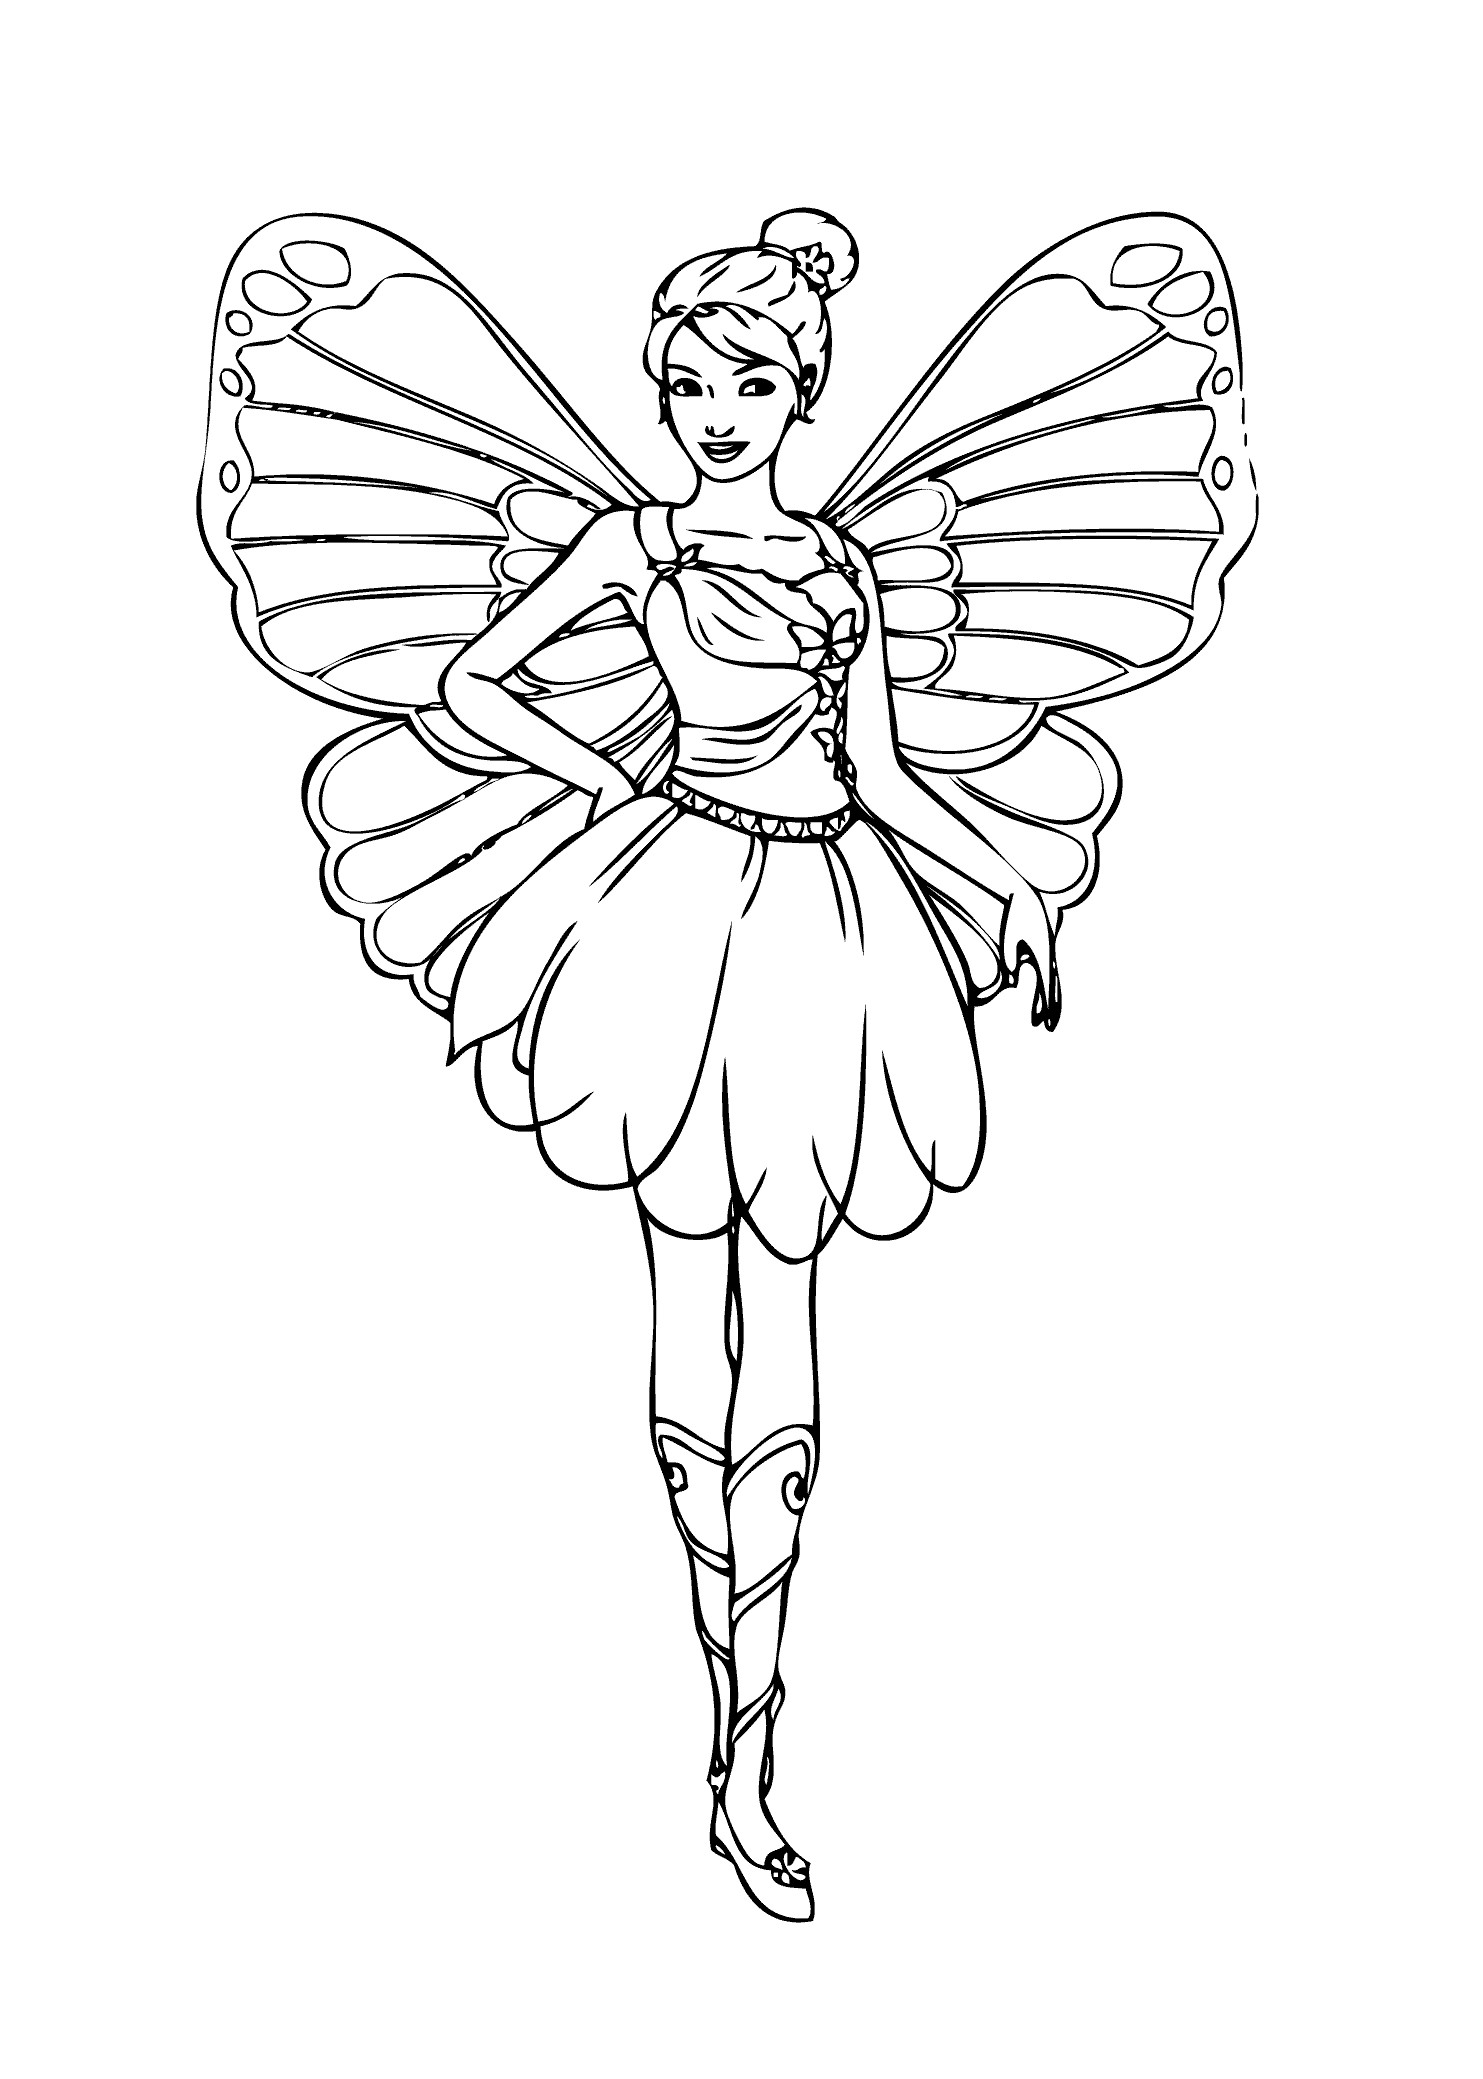 Coloring Pages For Girls Fairies
 Barbie fairy coloring page for girls printable free